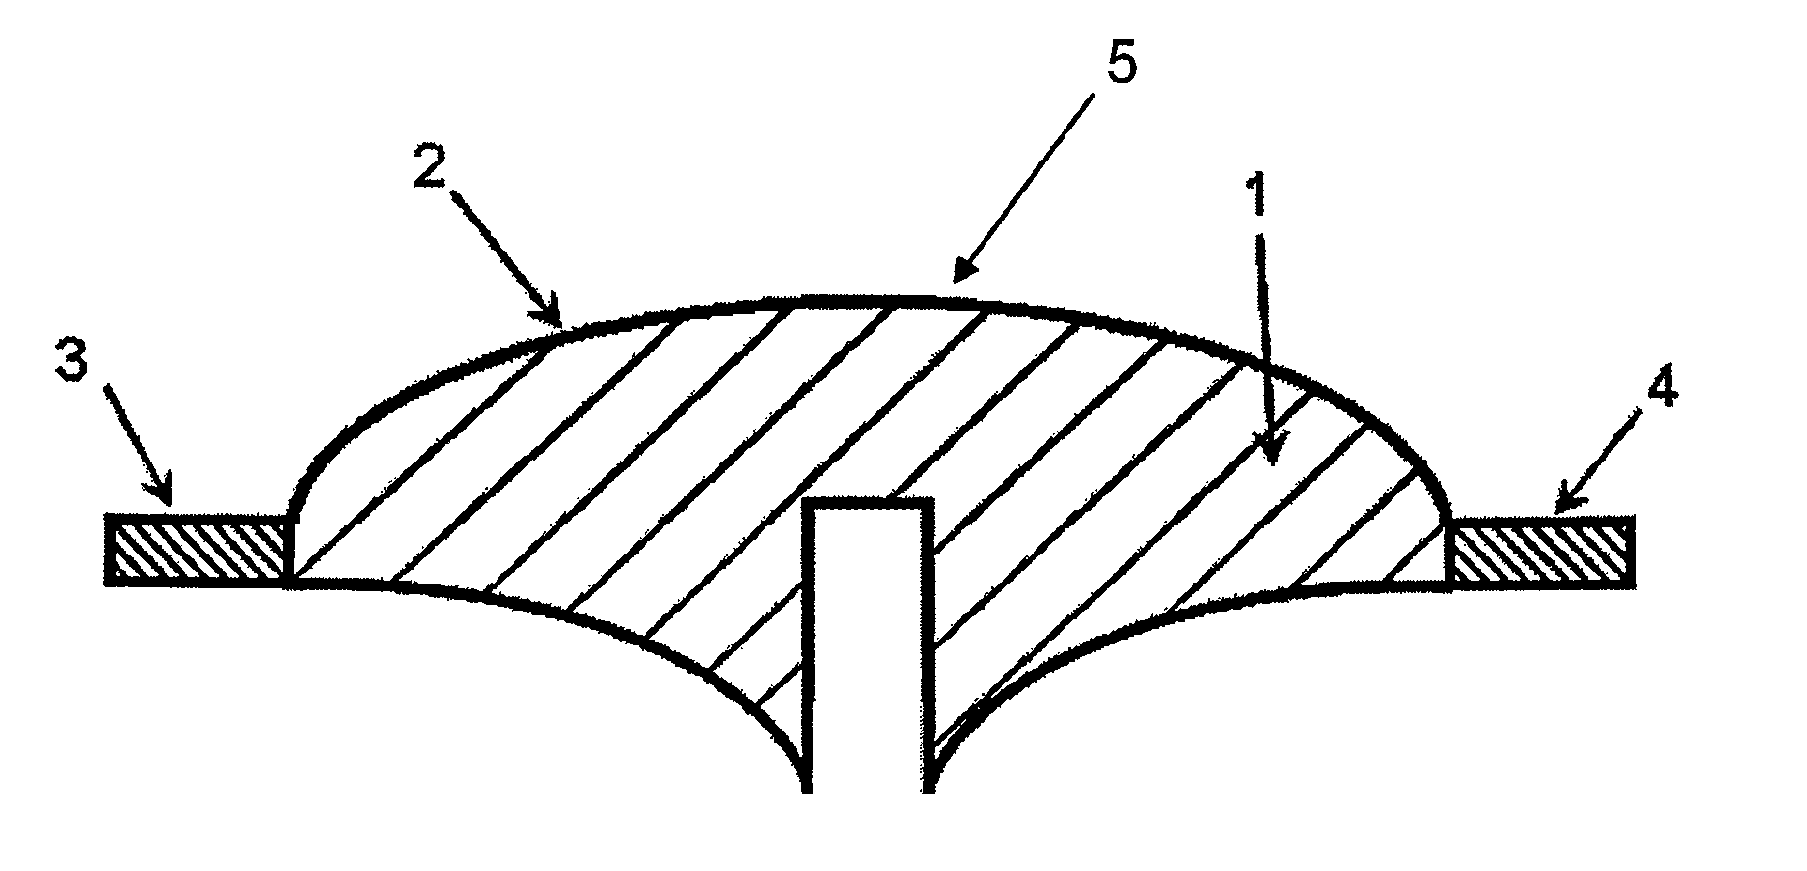 Method of constructing a tunable RF filter